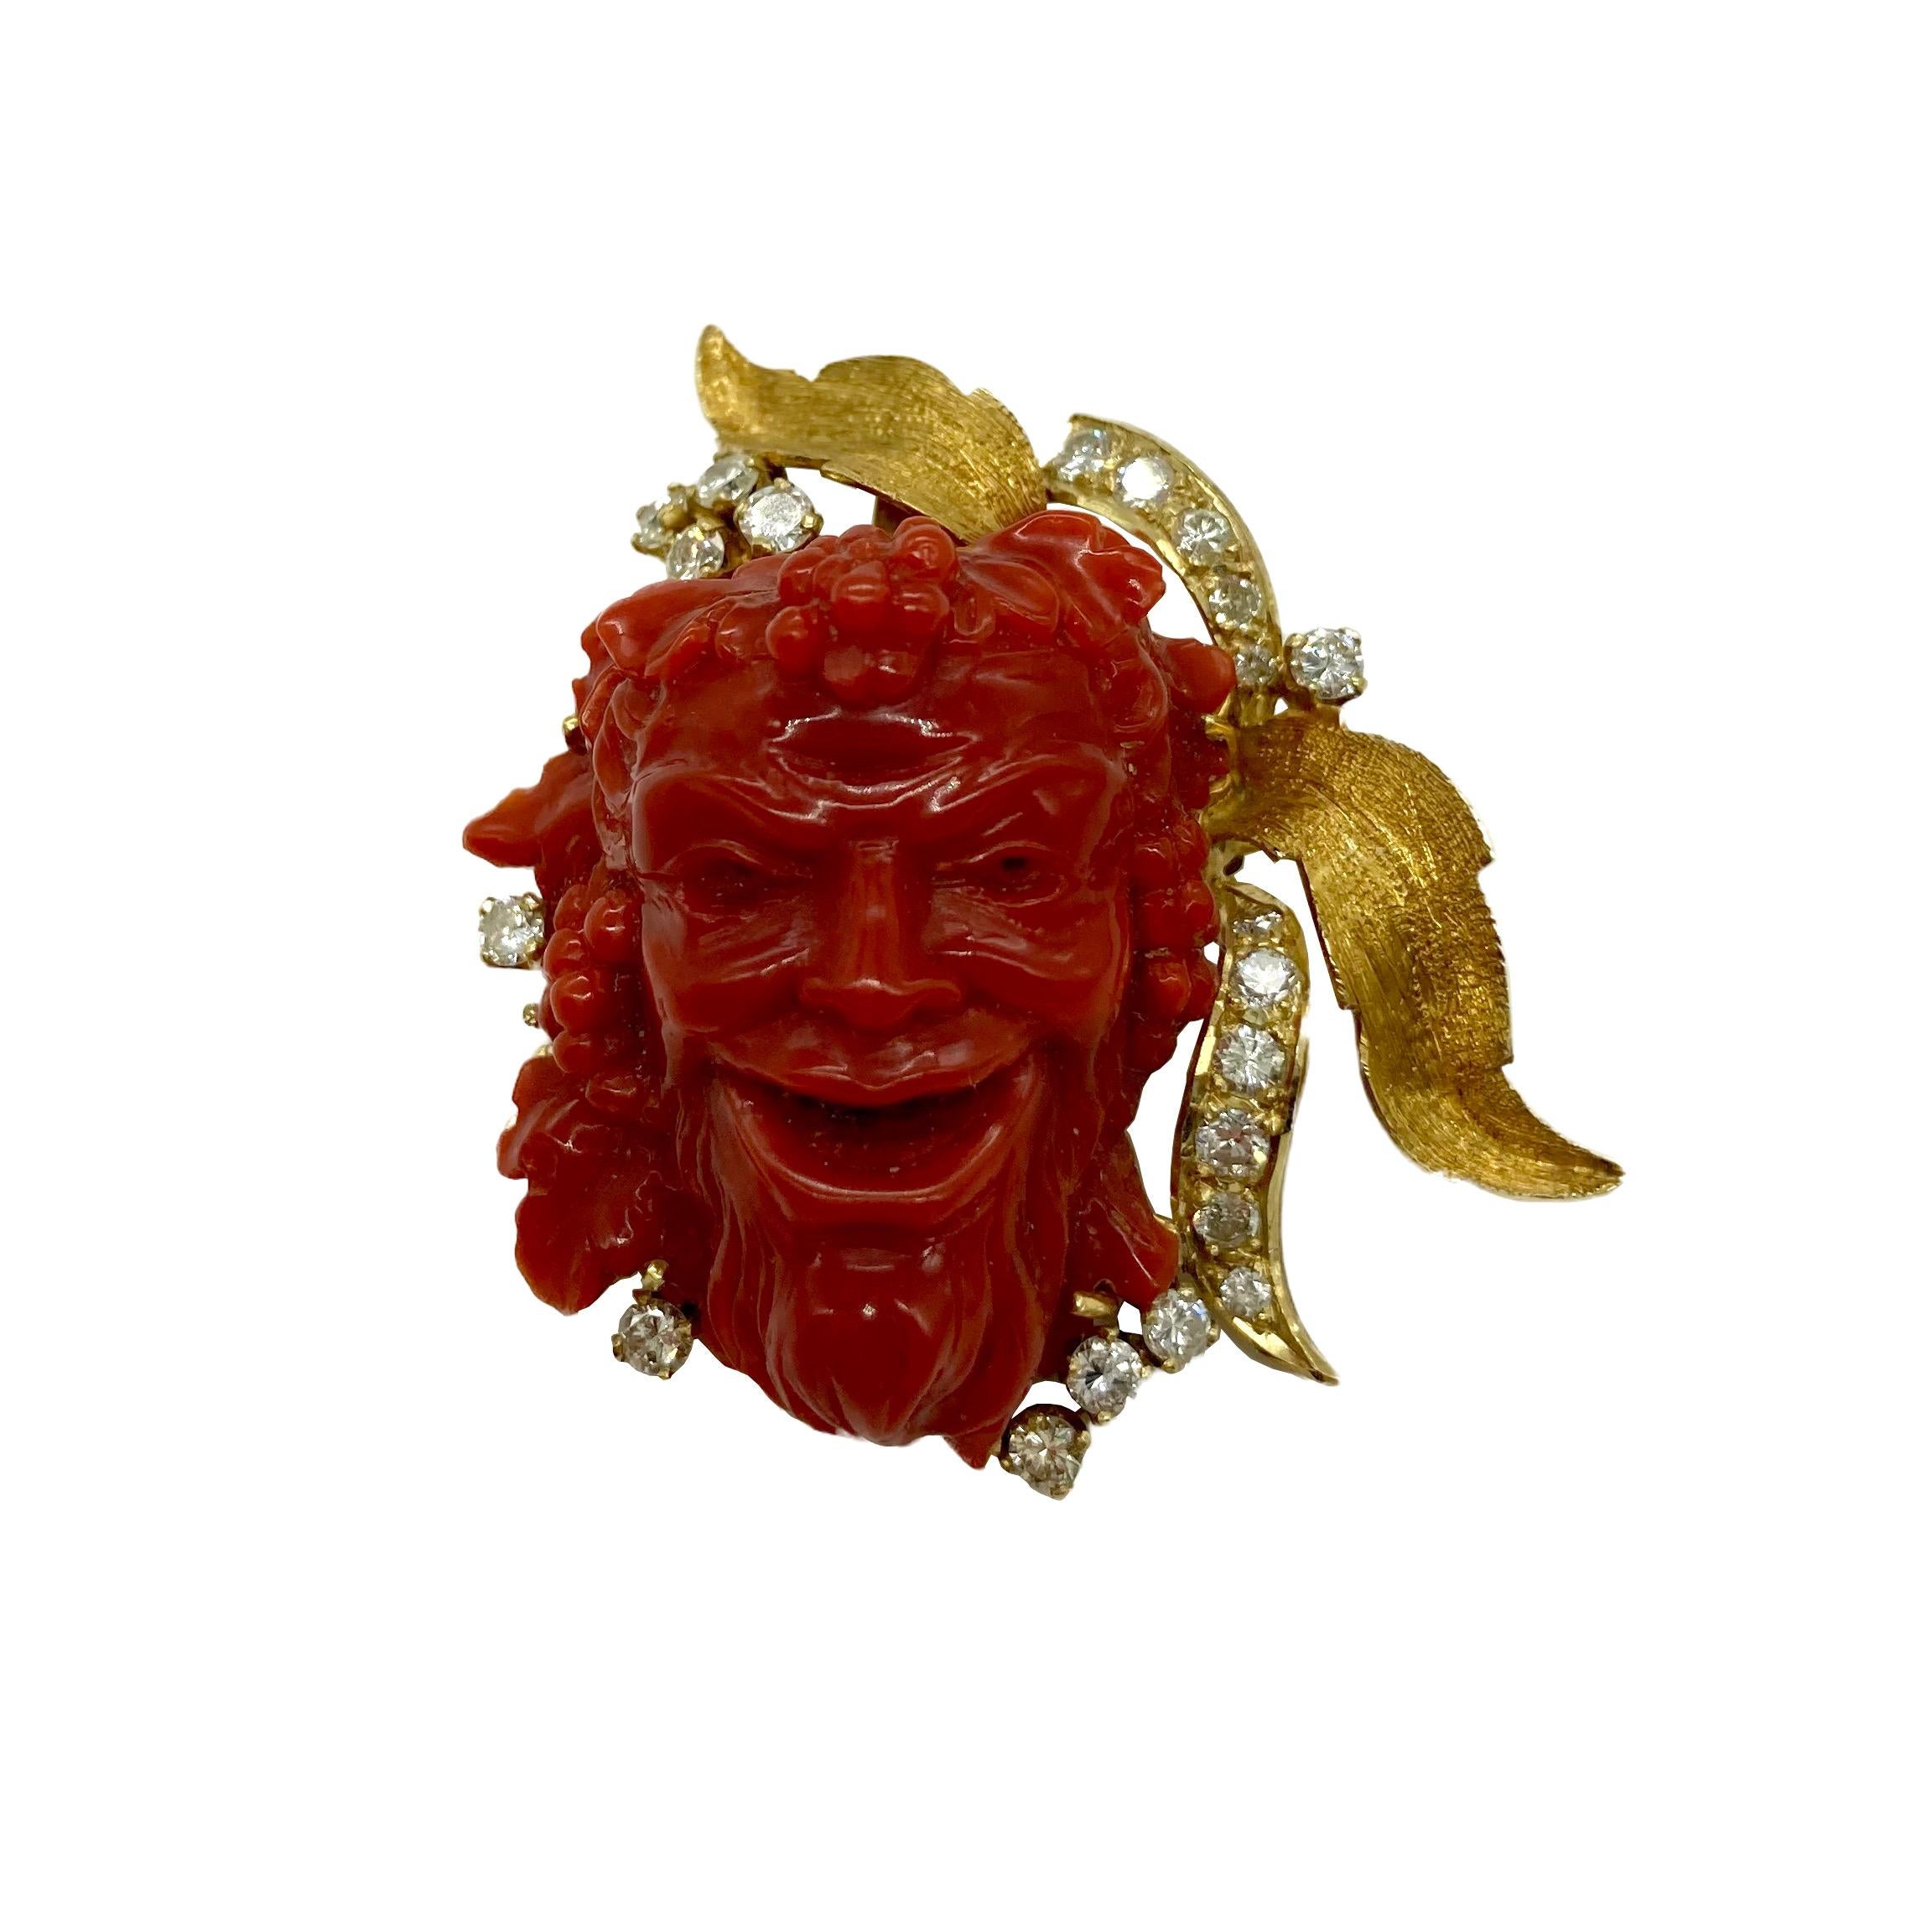 A beautiful red Italian coral brooch pendant depicting Bacchus, the Roman god of wine.  Embellished with 23 diamonds totaling approximately 1.25 carats (I-J VSI-SI) and mounted in 18 karat yellow gold. Circa 1970.